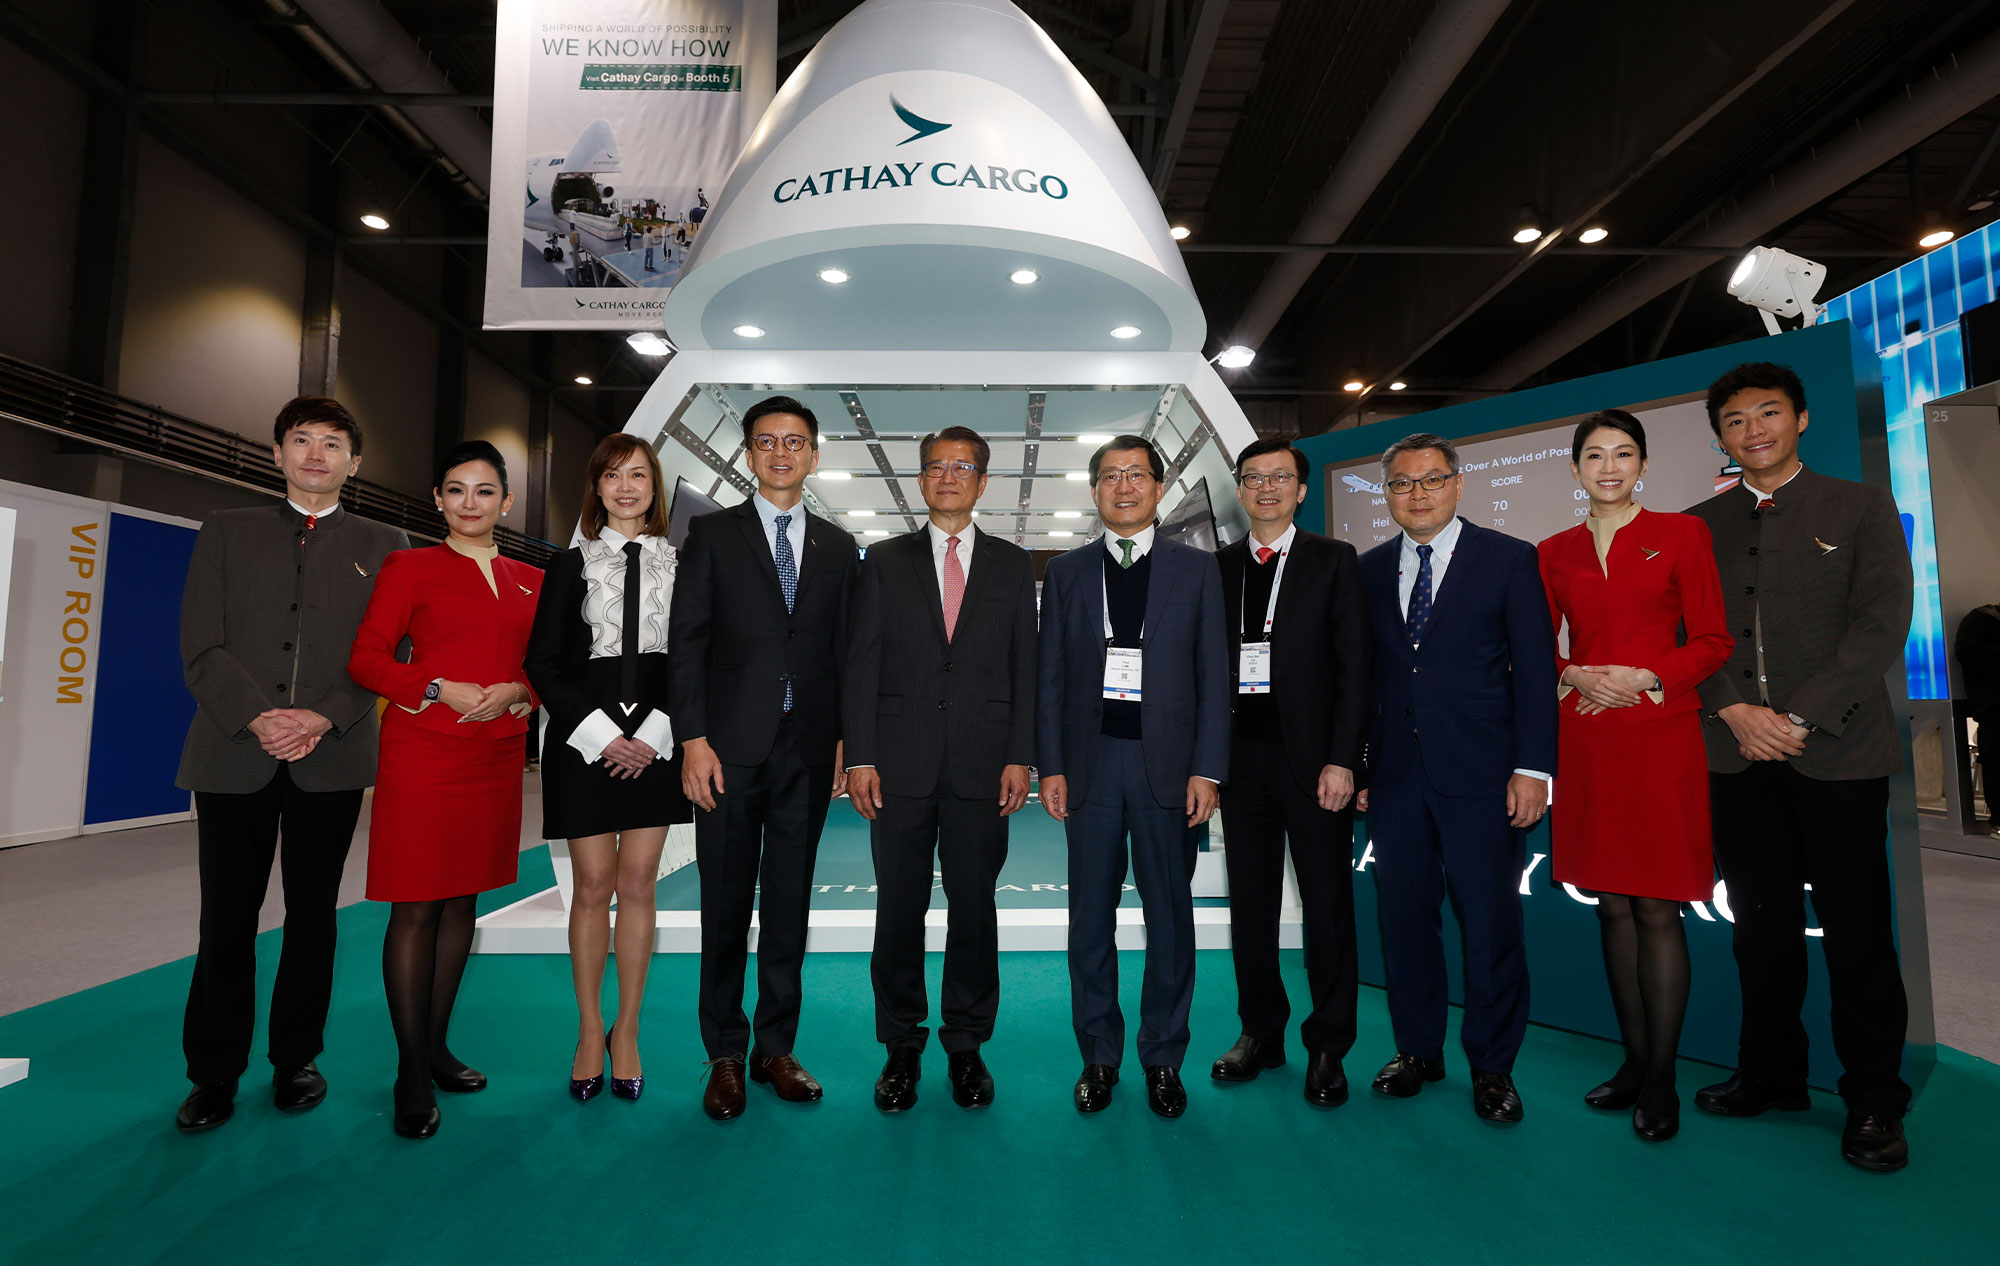 Posing with Cathay Pacific crew (left to right), Lavinia Lau, Cathay Chief Customer and Commercial Officer; Ronald Lam, Cathay Group Chief Executive Officer; Paul Chan, Financial Secretary, Hong Kong SAR Government; Fred Lam, Chief Executive Officer, Hong Kong International Airport; Chun San Liu, Under Secretary for Transport and Logistics, Hong Kong SAR Government; and Victor Liu,Director-General of Civil Aviation, Hong Kong Civil Aviation Department (CAD)